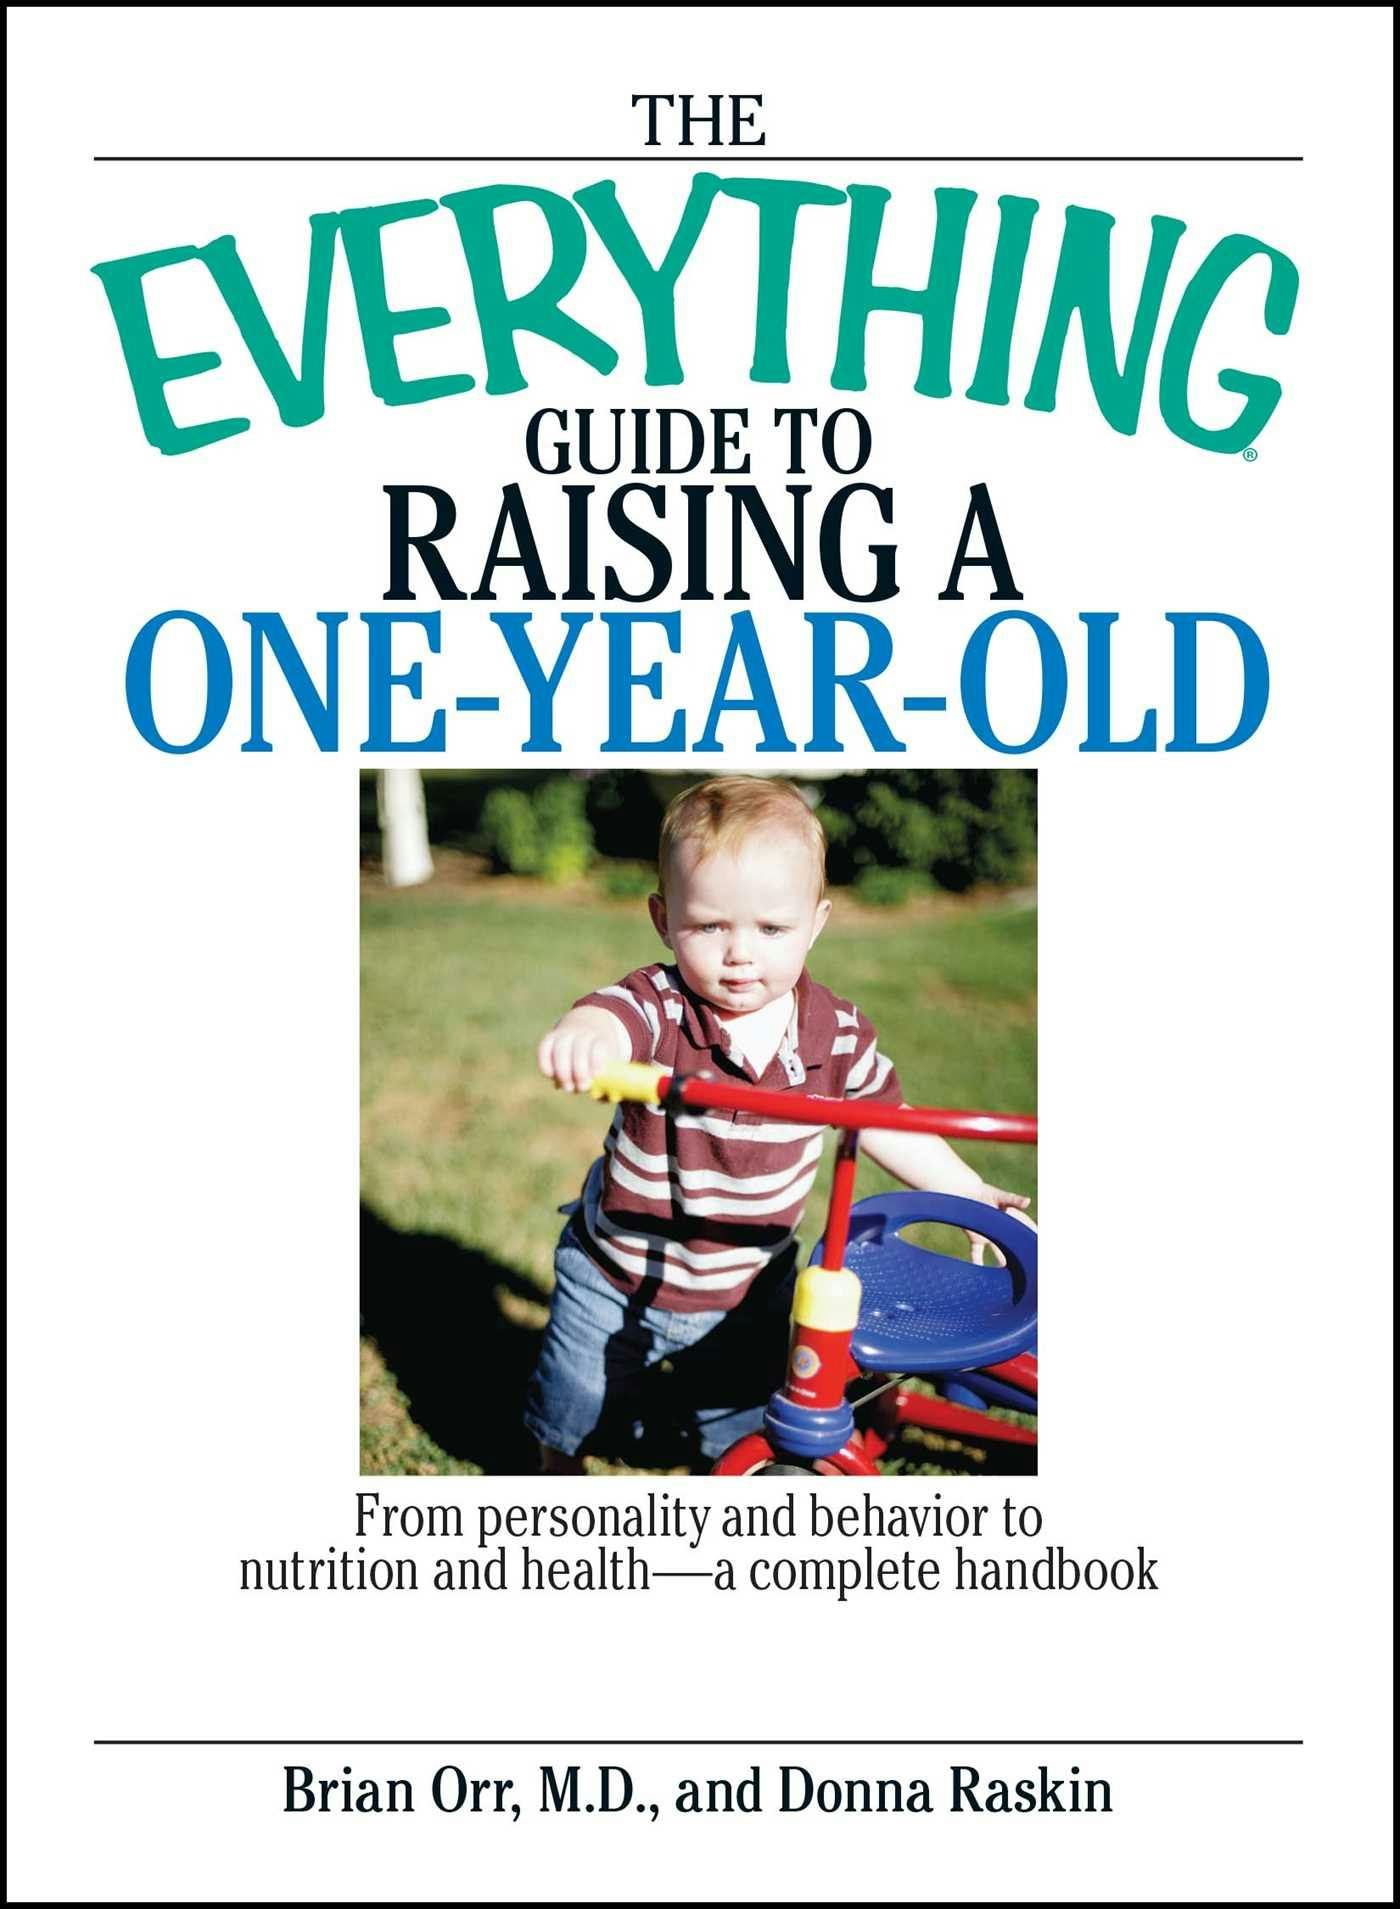 The Everything Guide To Raising A One-Year-Old: From Personality And Behavior to Nutrition And Health--a Complete Handbook - Donna Raskin, Brian Orr